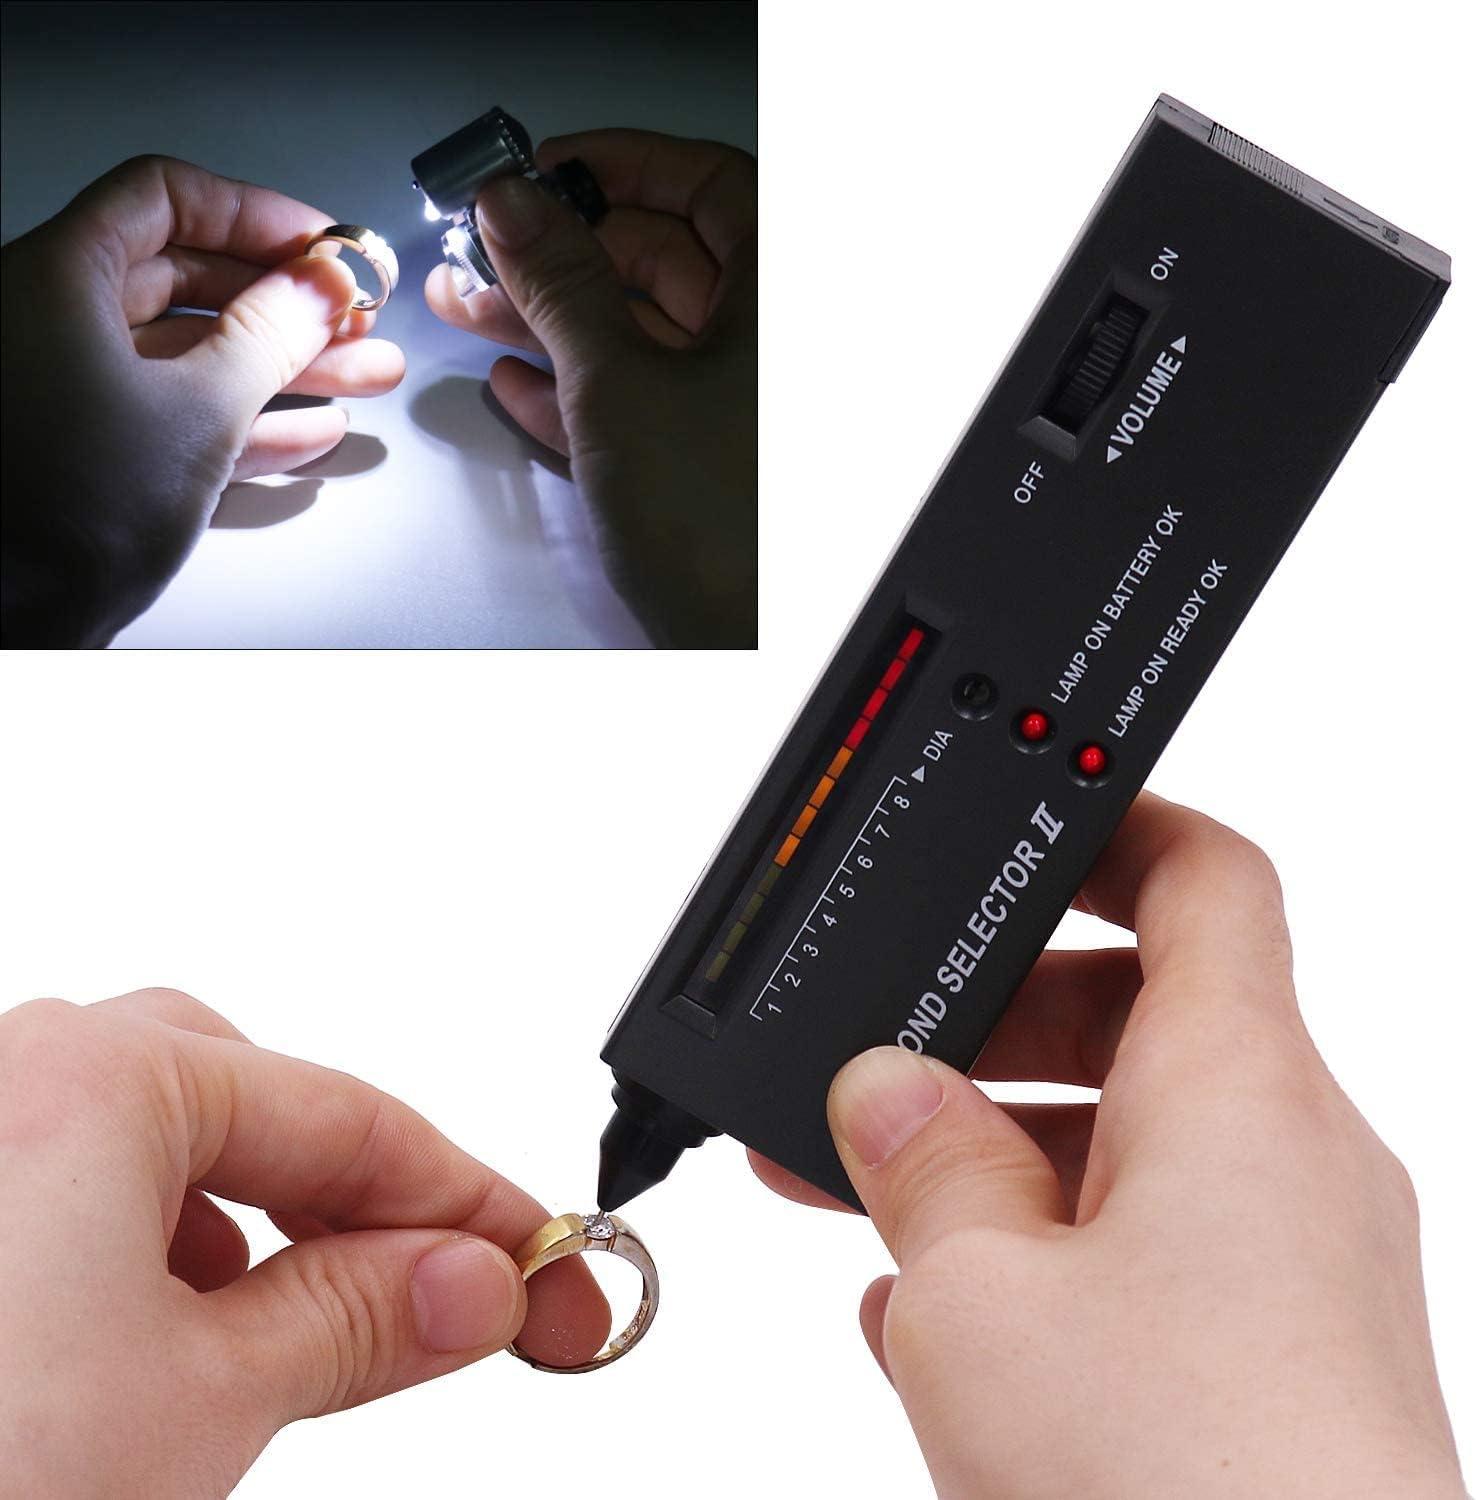  Diamond Tester Pen60X Mini LED Magnifying,High Accuracy  Jewelry Diamond Tester Tool,Environmental Protection 9V  Battery,Professional Diamond Selector For Novice&Expert,Thermal  Conductivity Meter